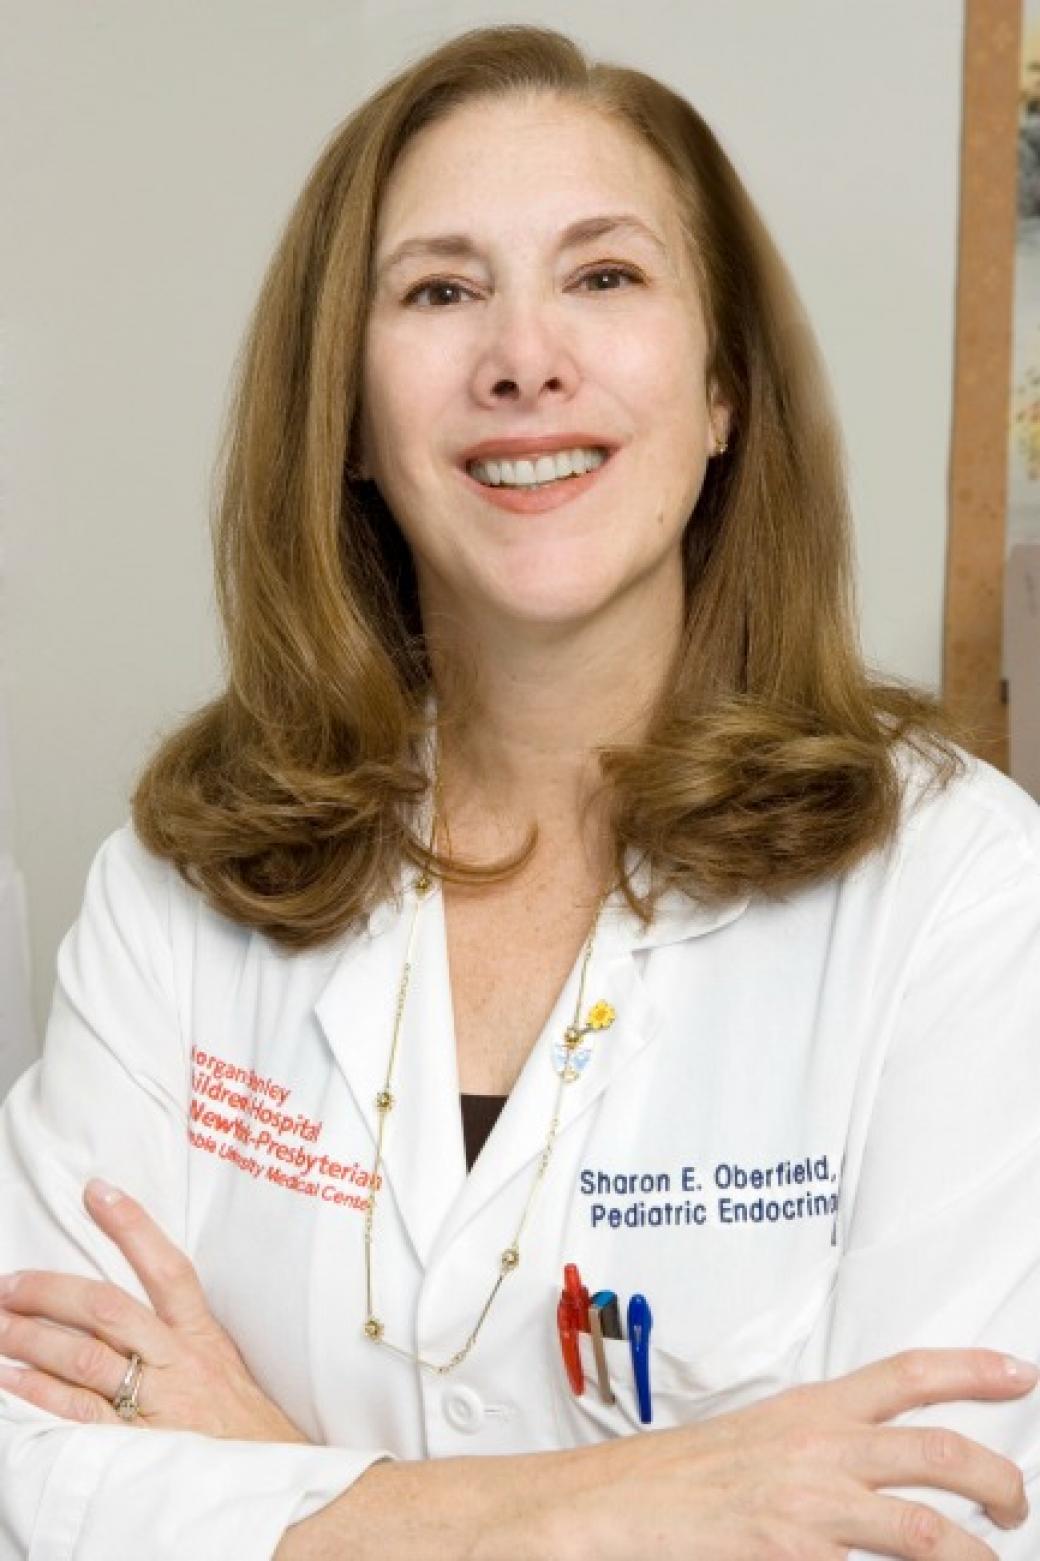 Dr. Sharon Oberfield Named PresidentElect of the Pediatric Endocrine